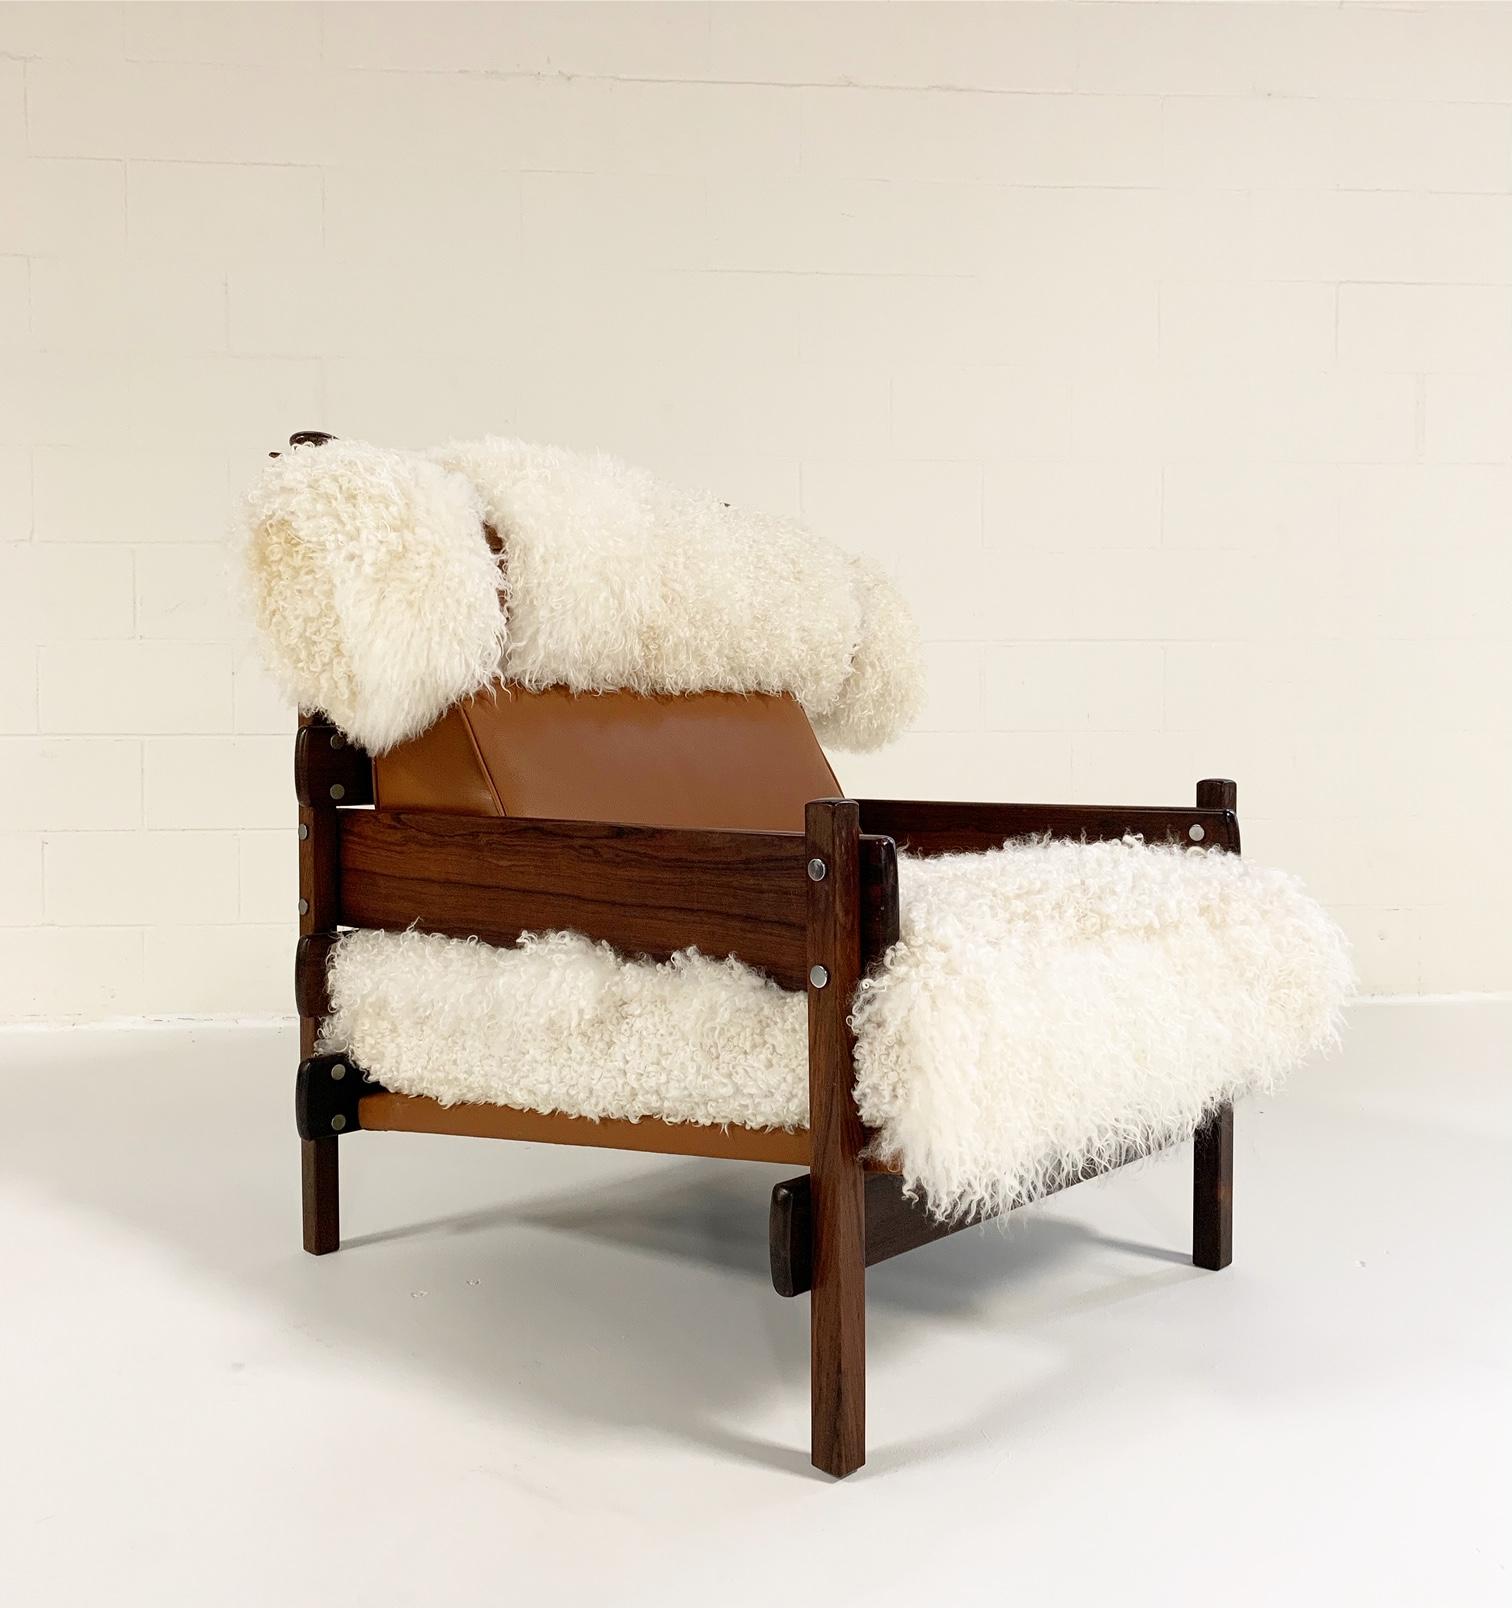 One of a Kind Sergio Rodrigues for Oca Solid Jacaranda chair restored in Gotland sheepskin and Loro Piana Italian buffalo leather by Forsyth in Saint Louis.

Brazilian architect-designer Sergio Rodrigues was born in 1927 in Rio de Janeiro to a